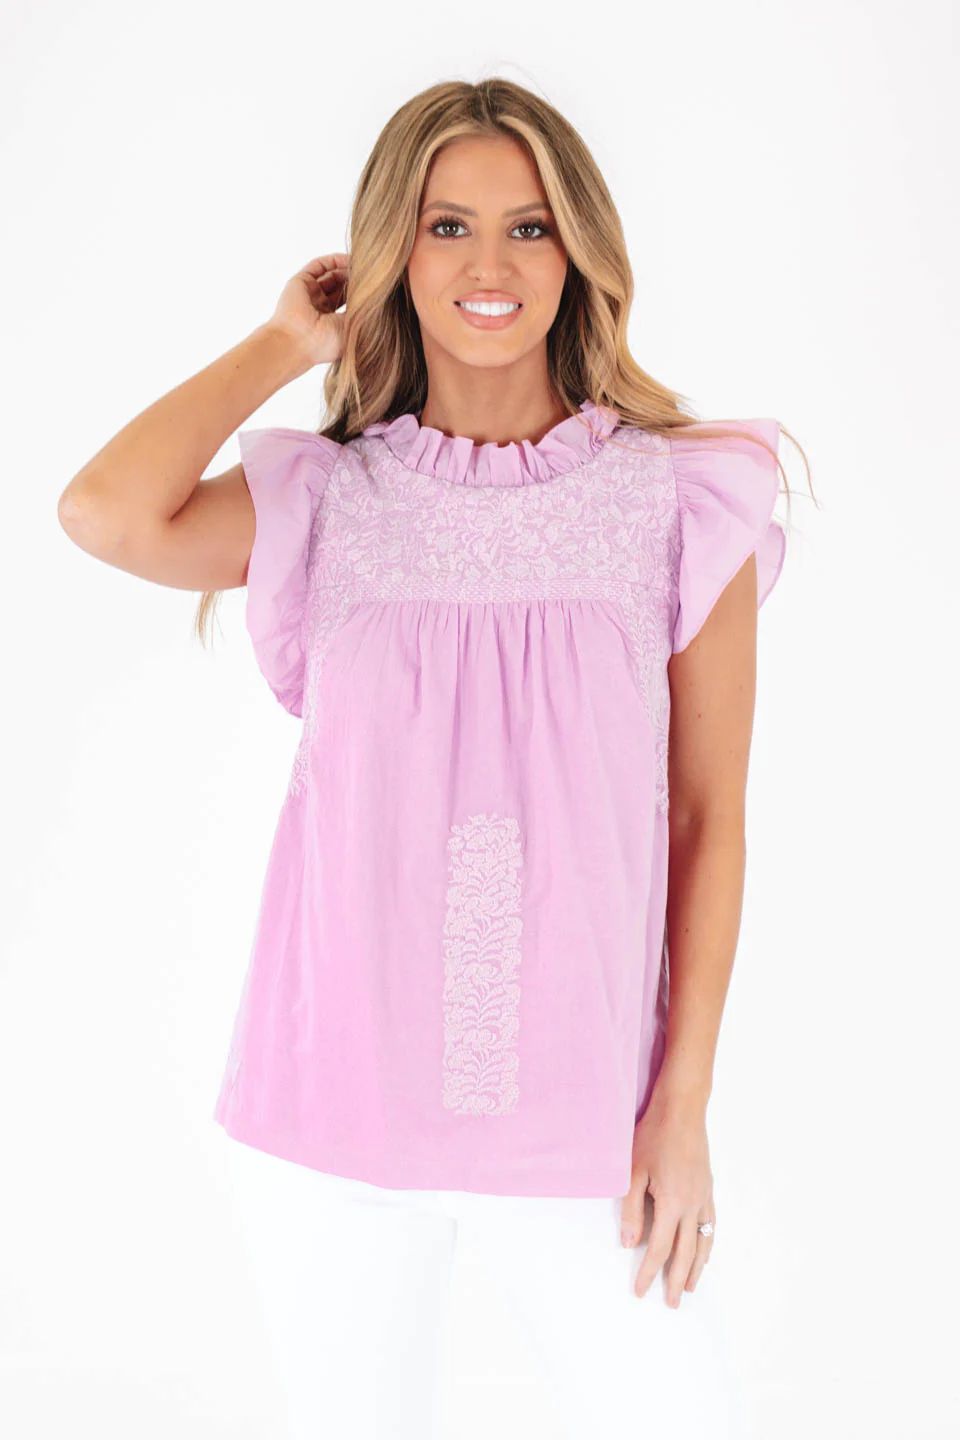 The Mabel Top - Lavender | The Impeccable Pig